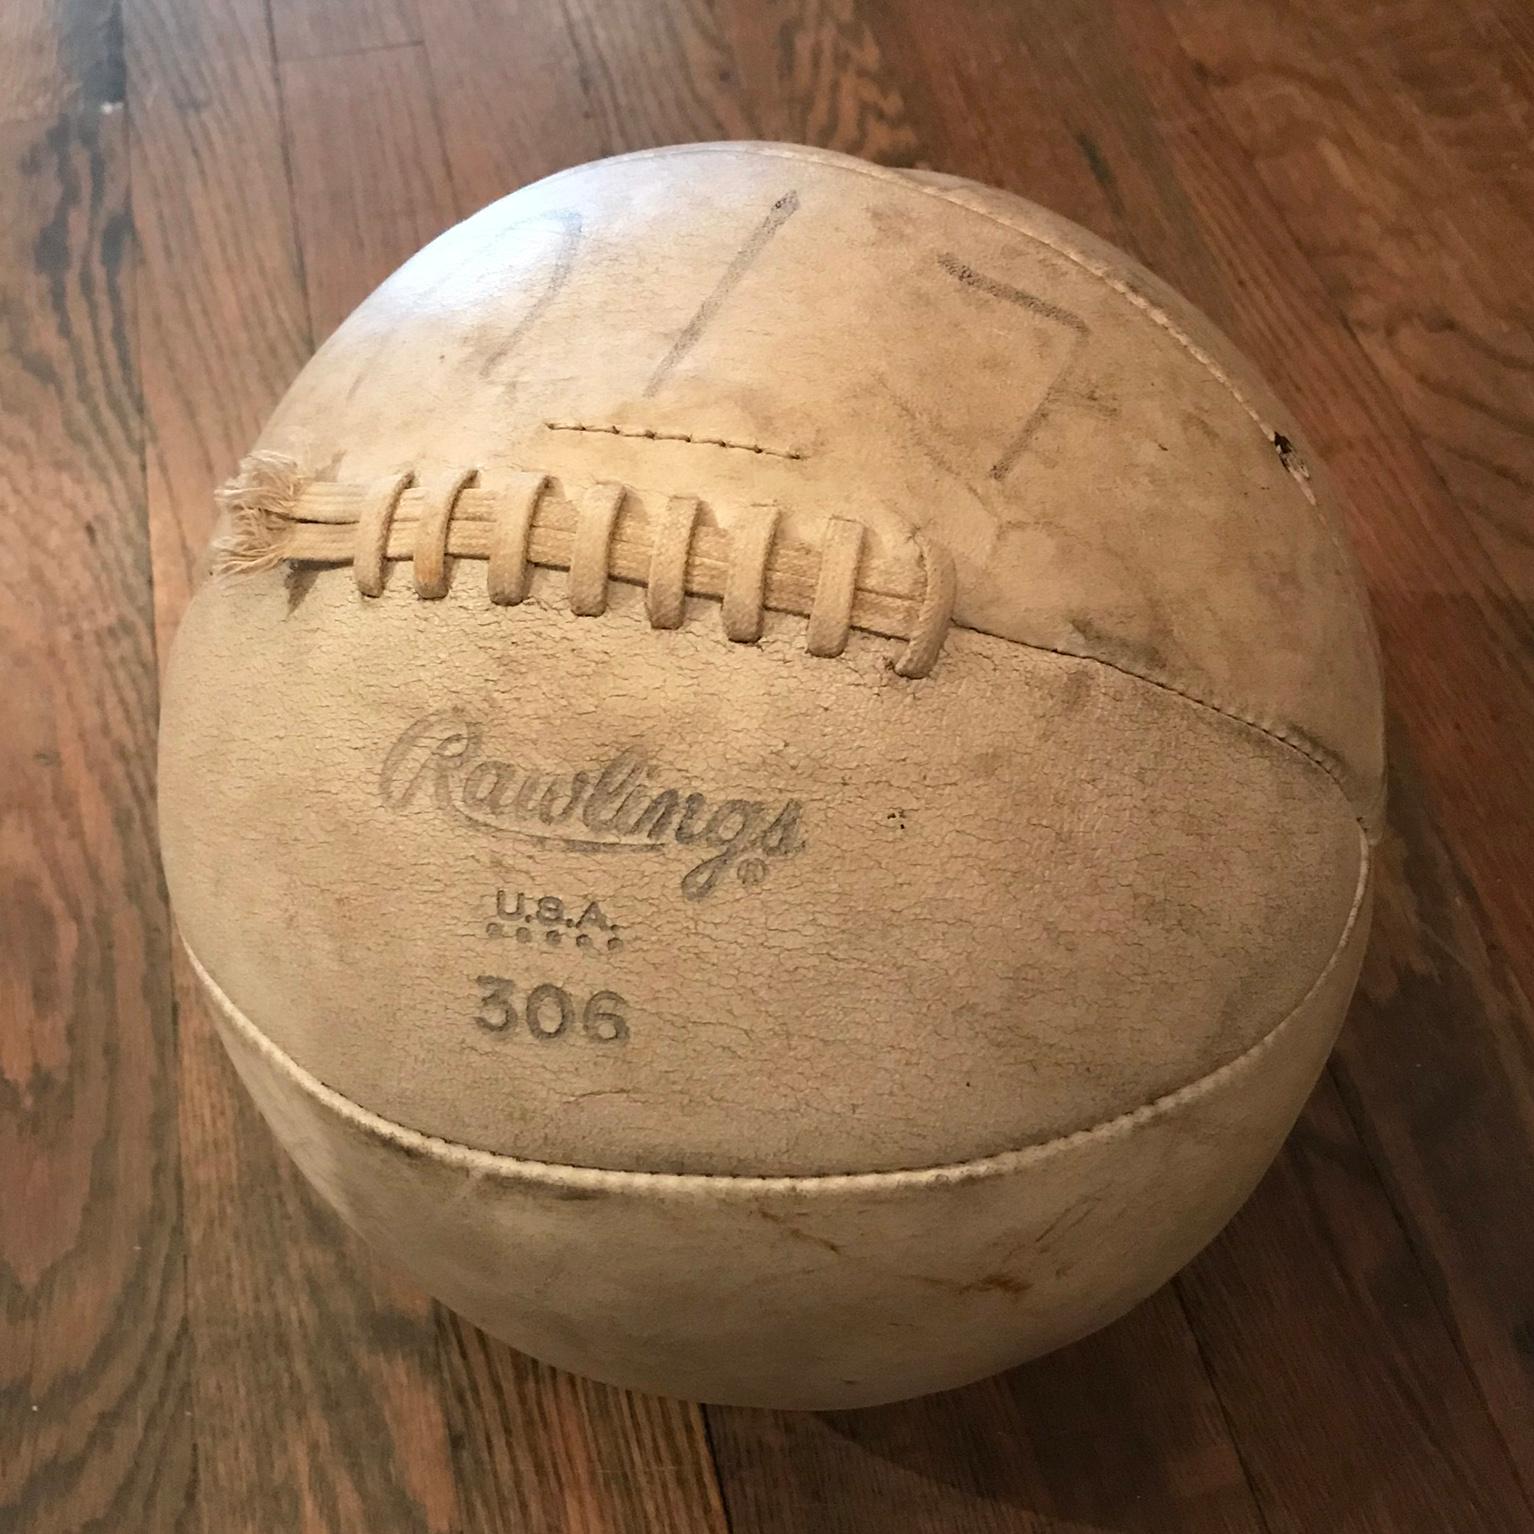 Vintage medicine ball by Rawlings #306 for upper body strength training features a white leather hide with it's original well-worn patina.